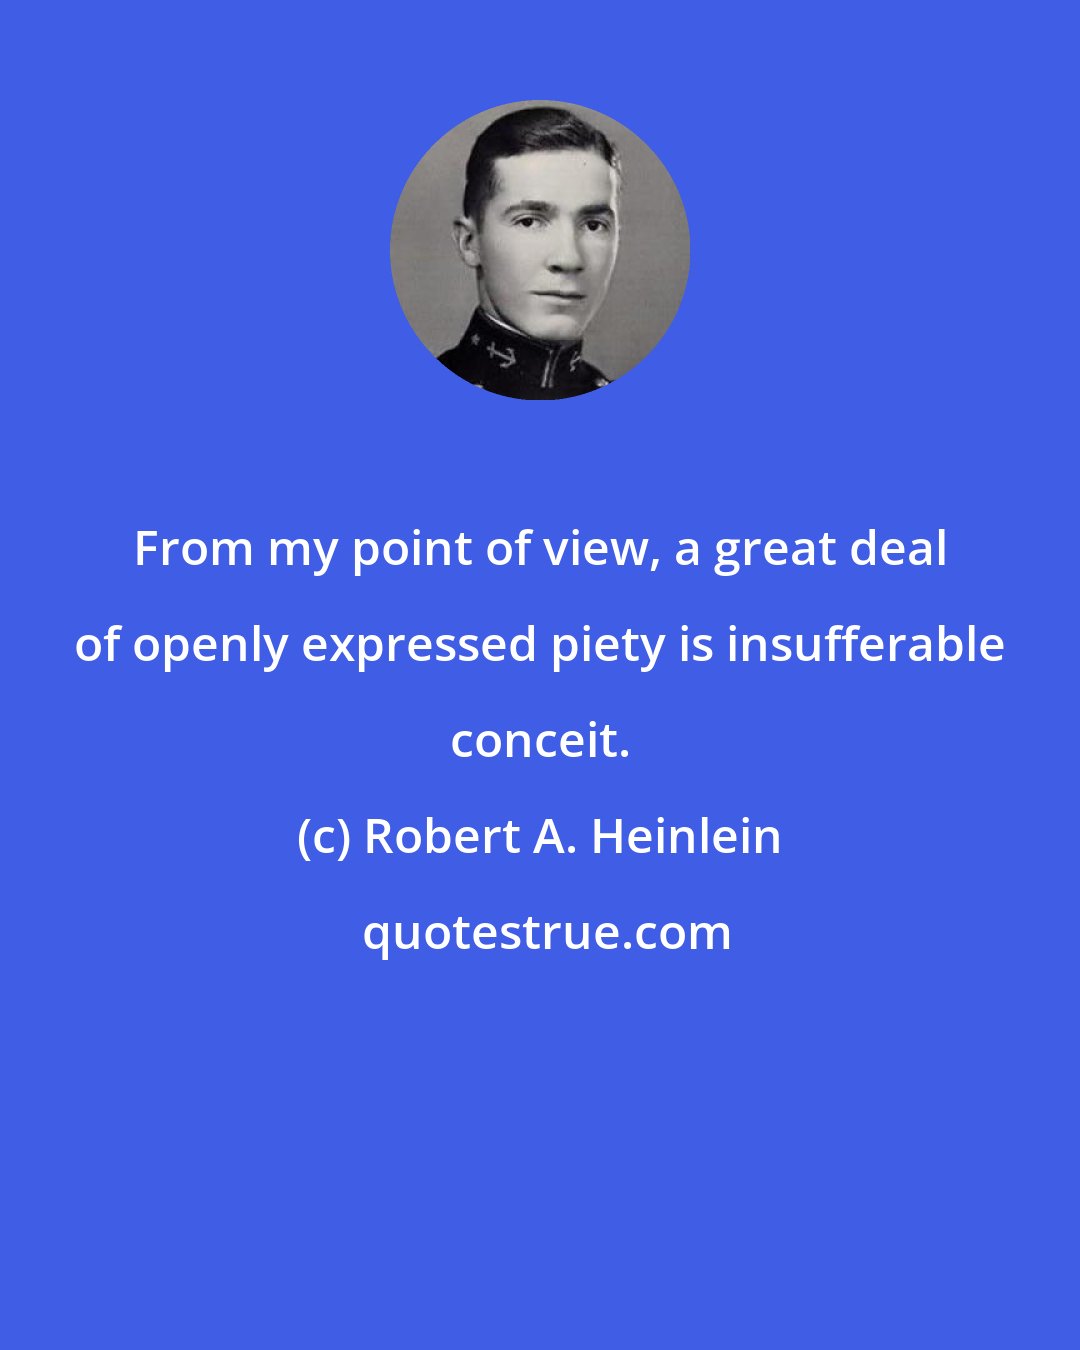 Robert A. Heinlein: From my point of view, a great deal of openly expressed piety is insufferable conceit.